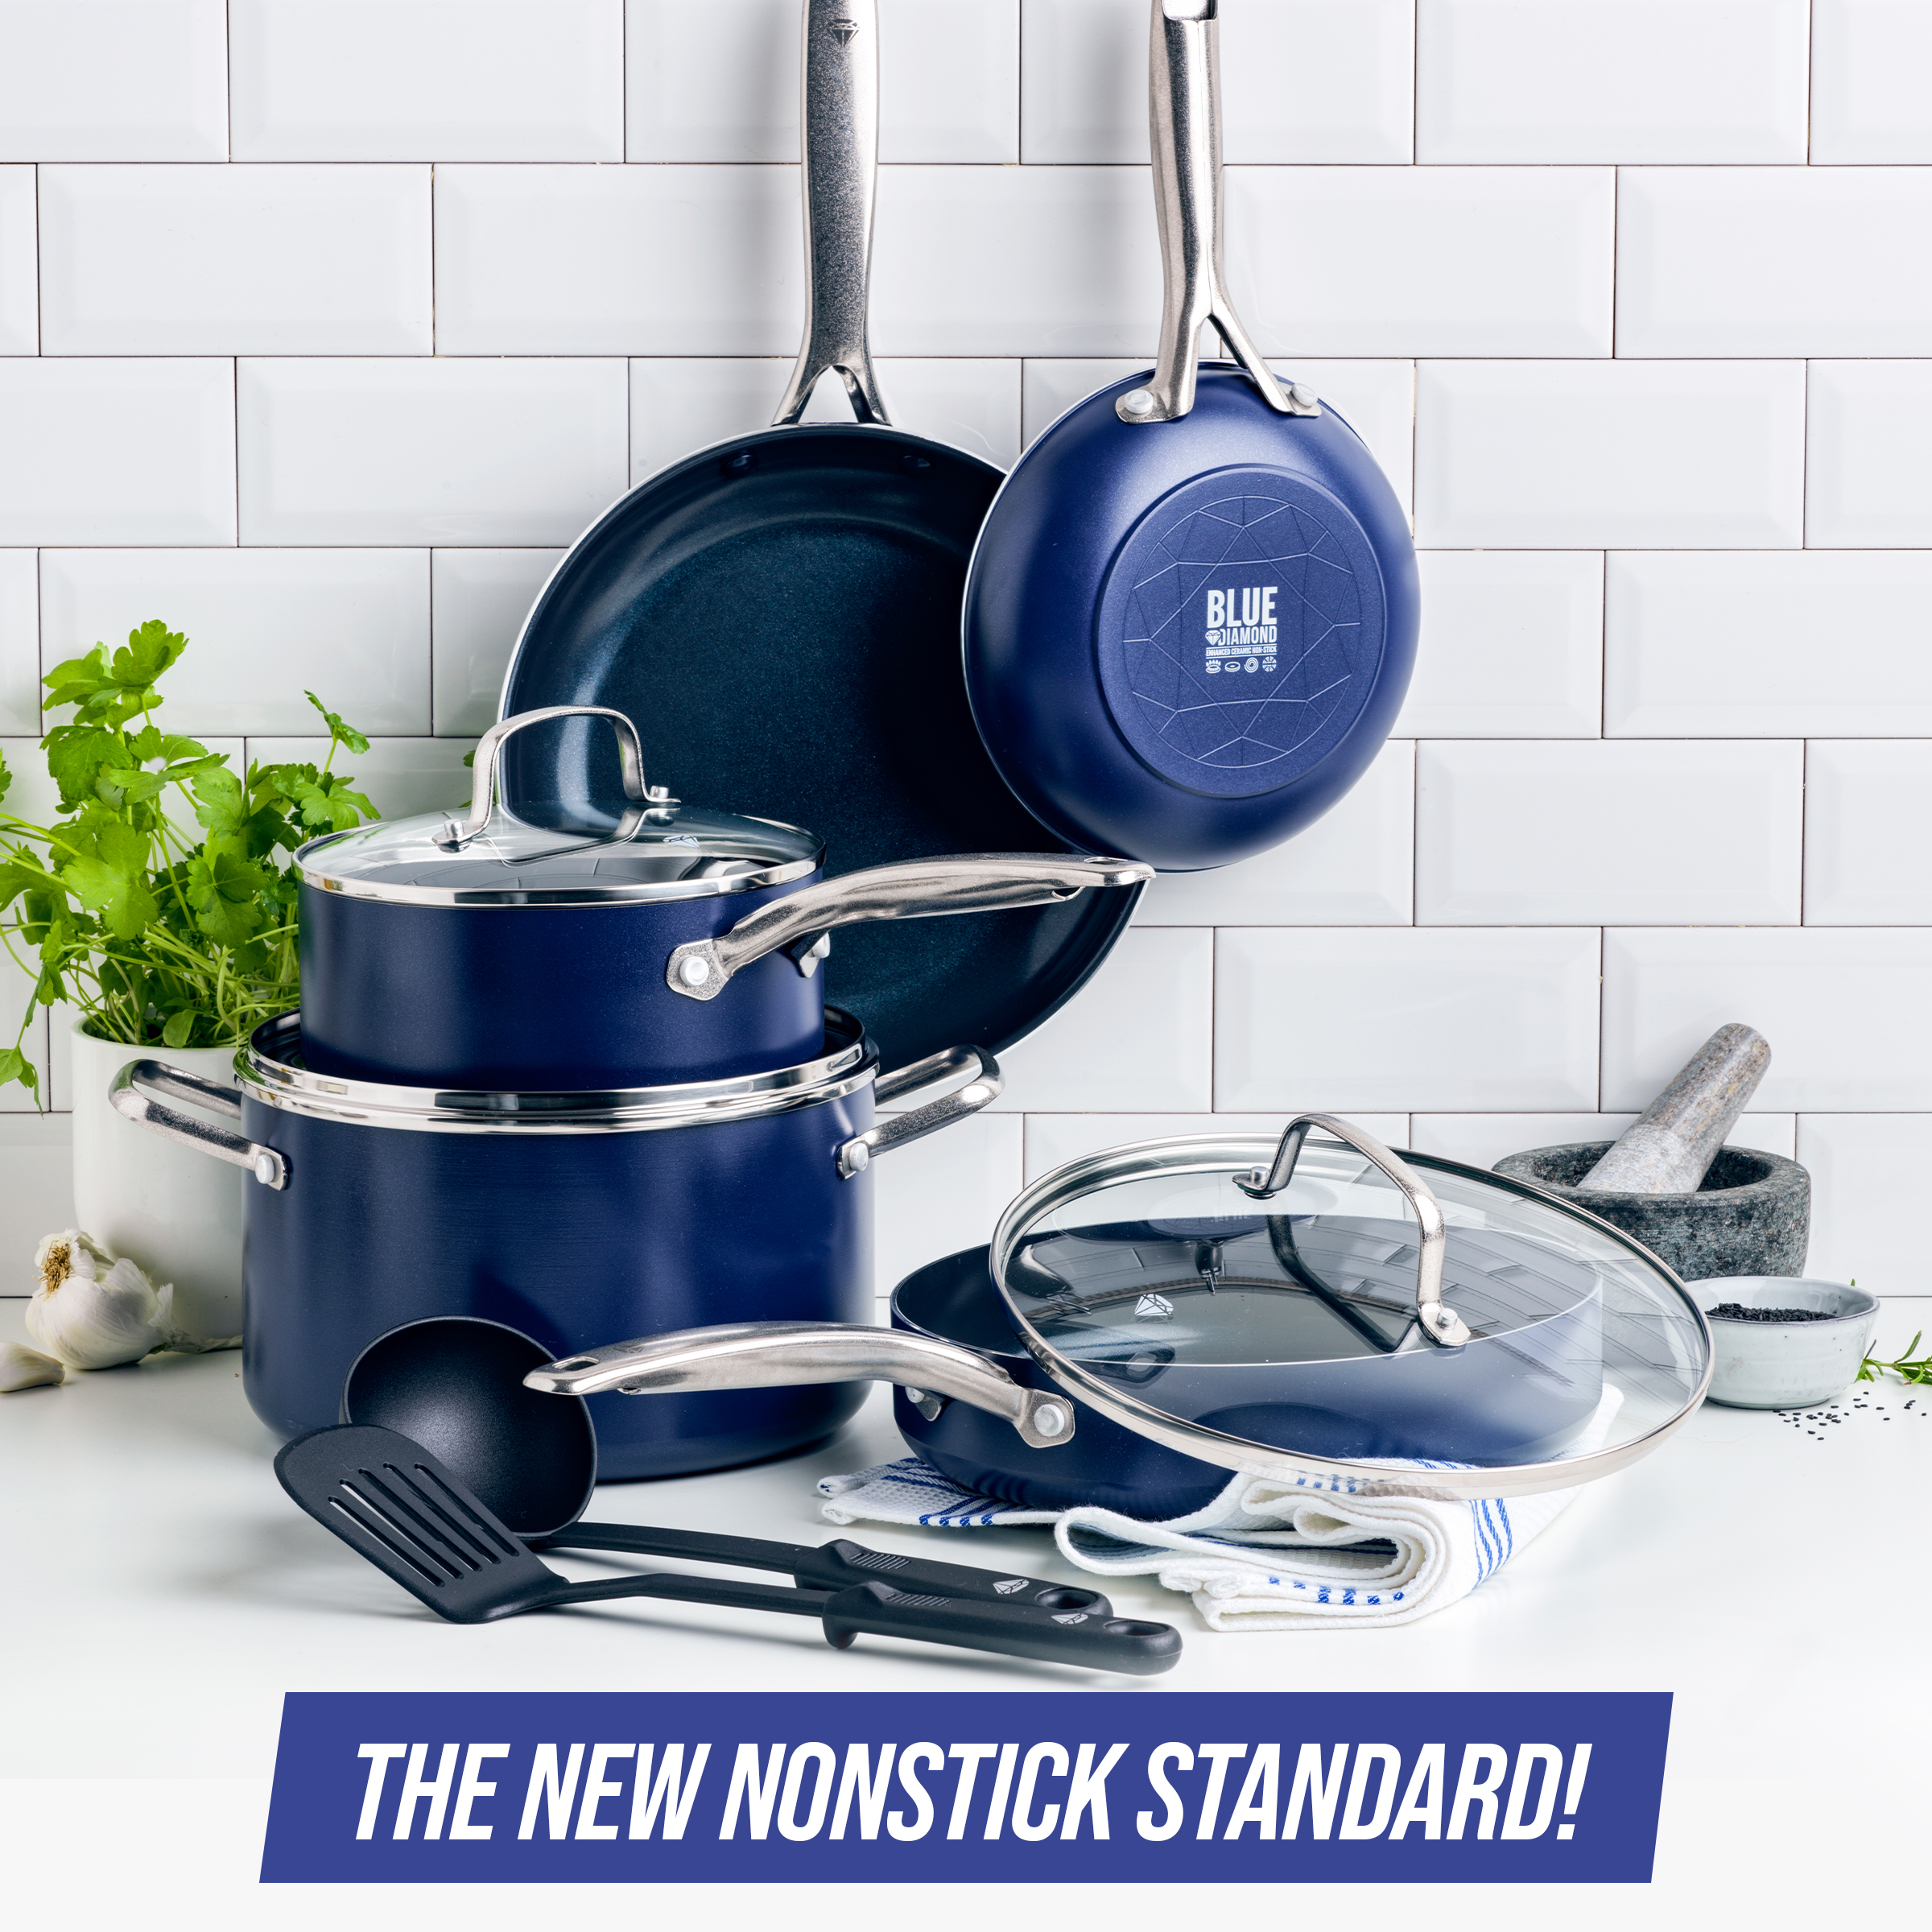 Blue Diamond 12-Piece Toxin-Free Ceramic Nonstick Pots and Pans Cookware Set, Dishwasher Safe - image 2 of 10